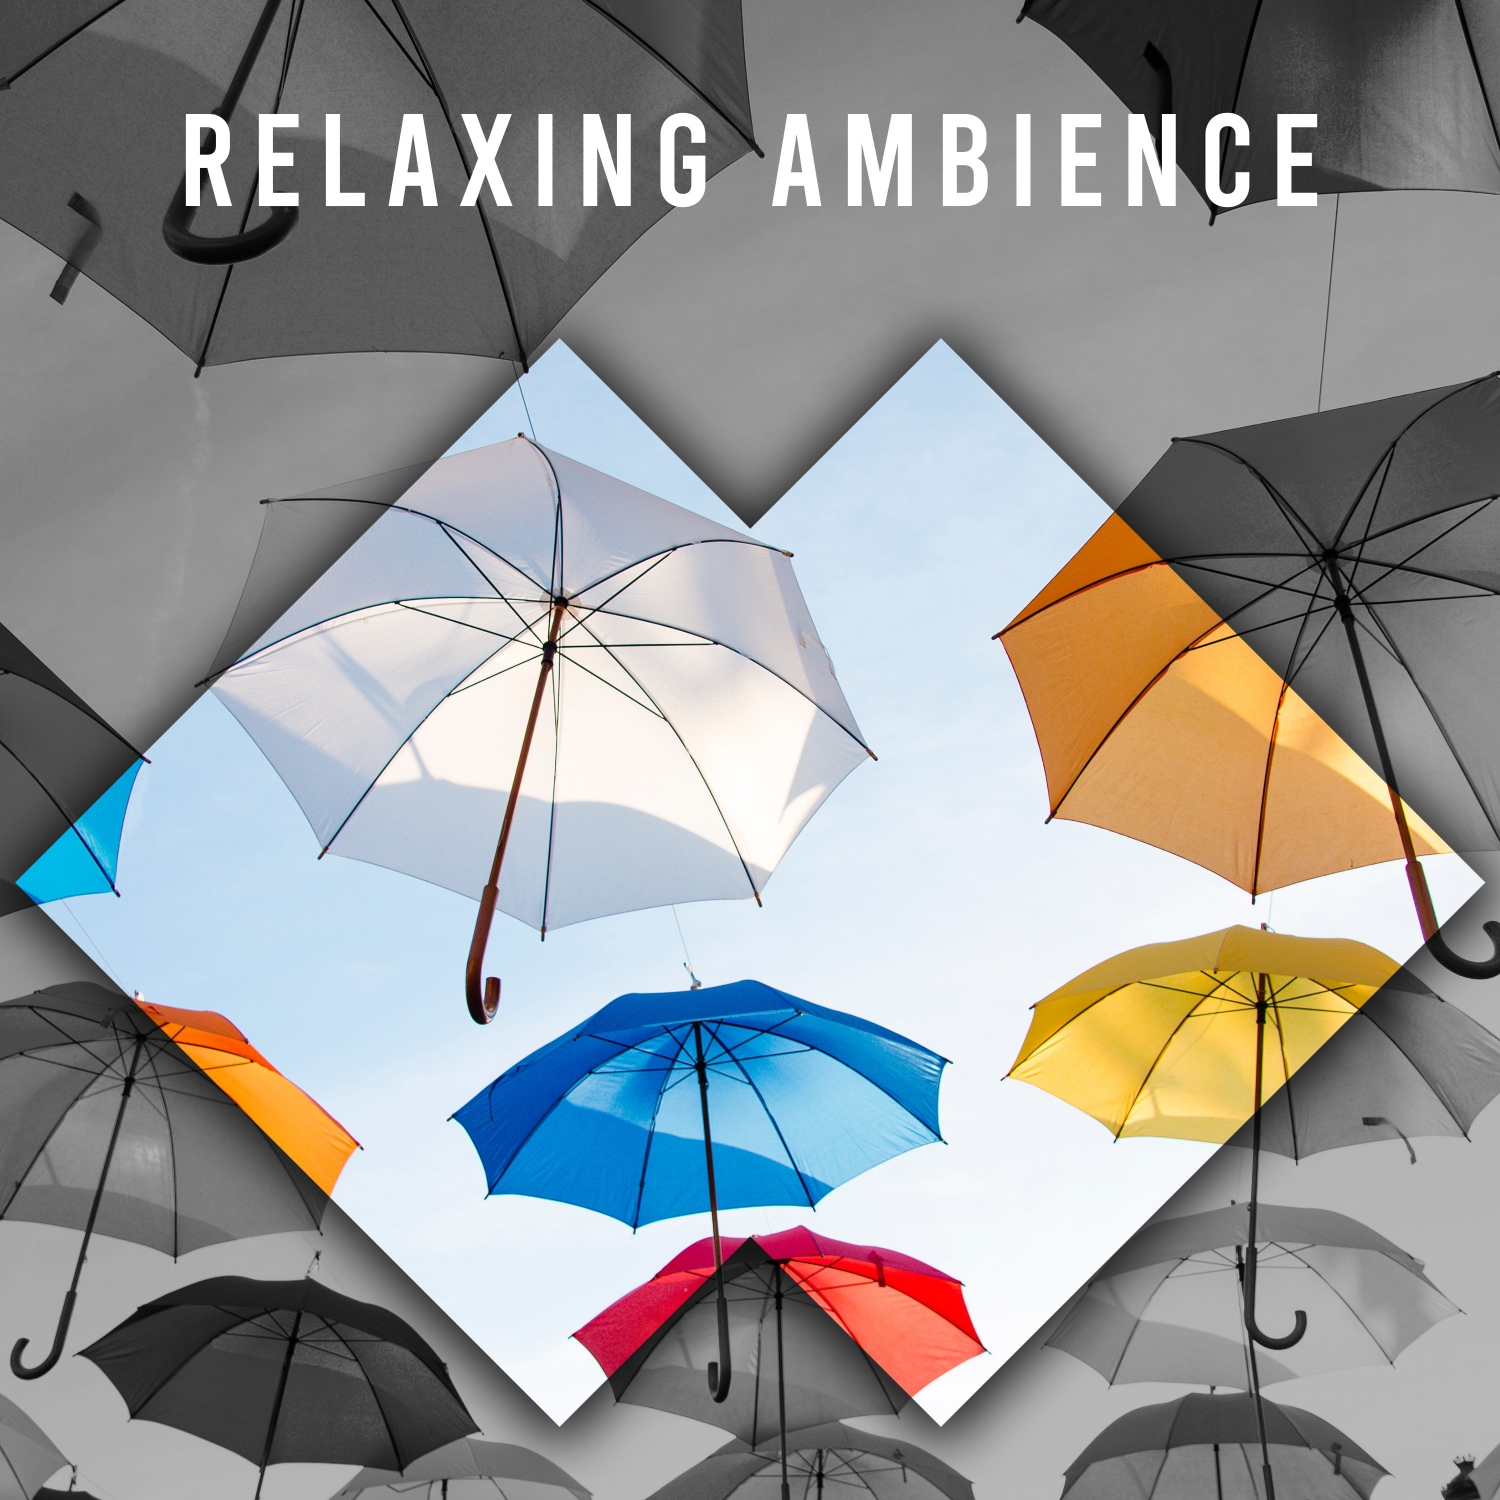 19 Relaxing Ambience Songs to Calm the Mind